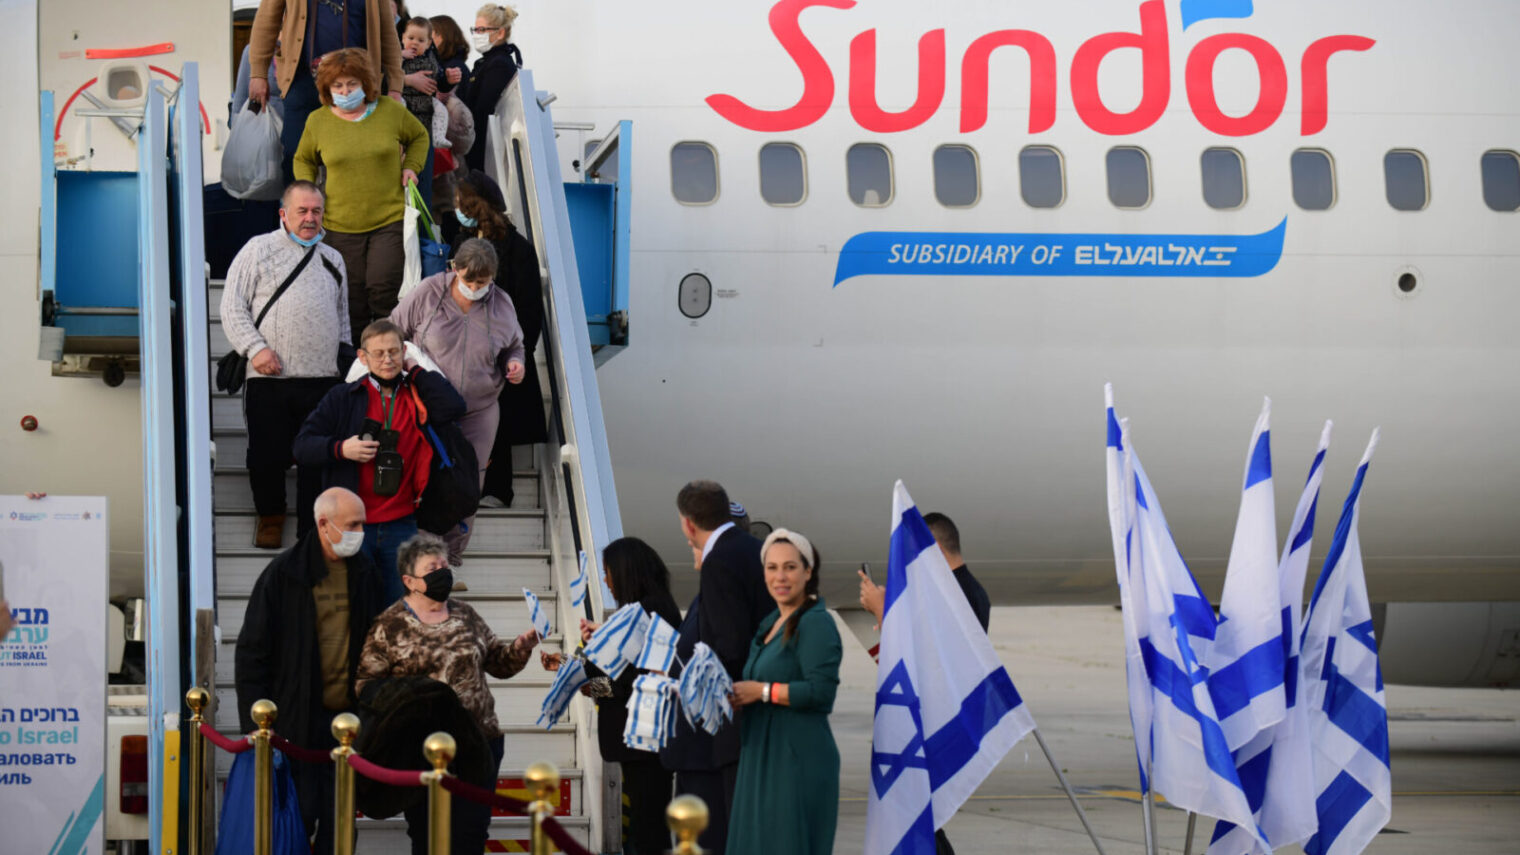 Jewish immigrants fleeing the war in Ukraine, on a rescue flight sponosred by the IFCJ, arrive at Ben Gurion airport near Tel Aviv on March 6, 2022. Photo by Tomer Neuberg/FLASH90